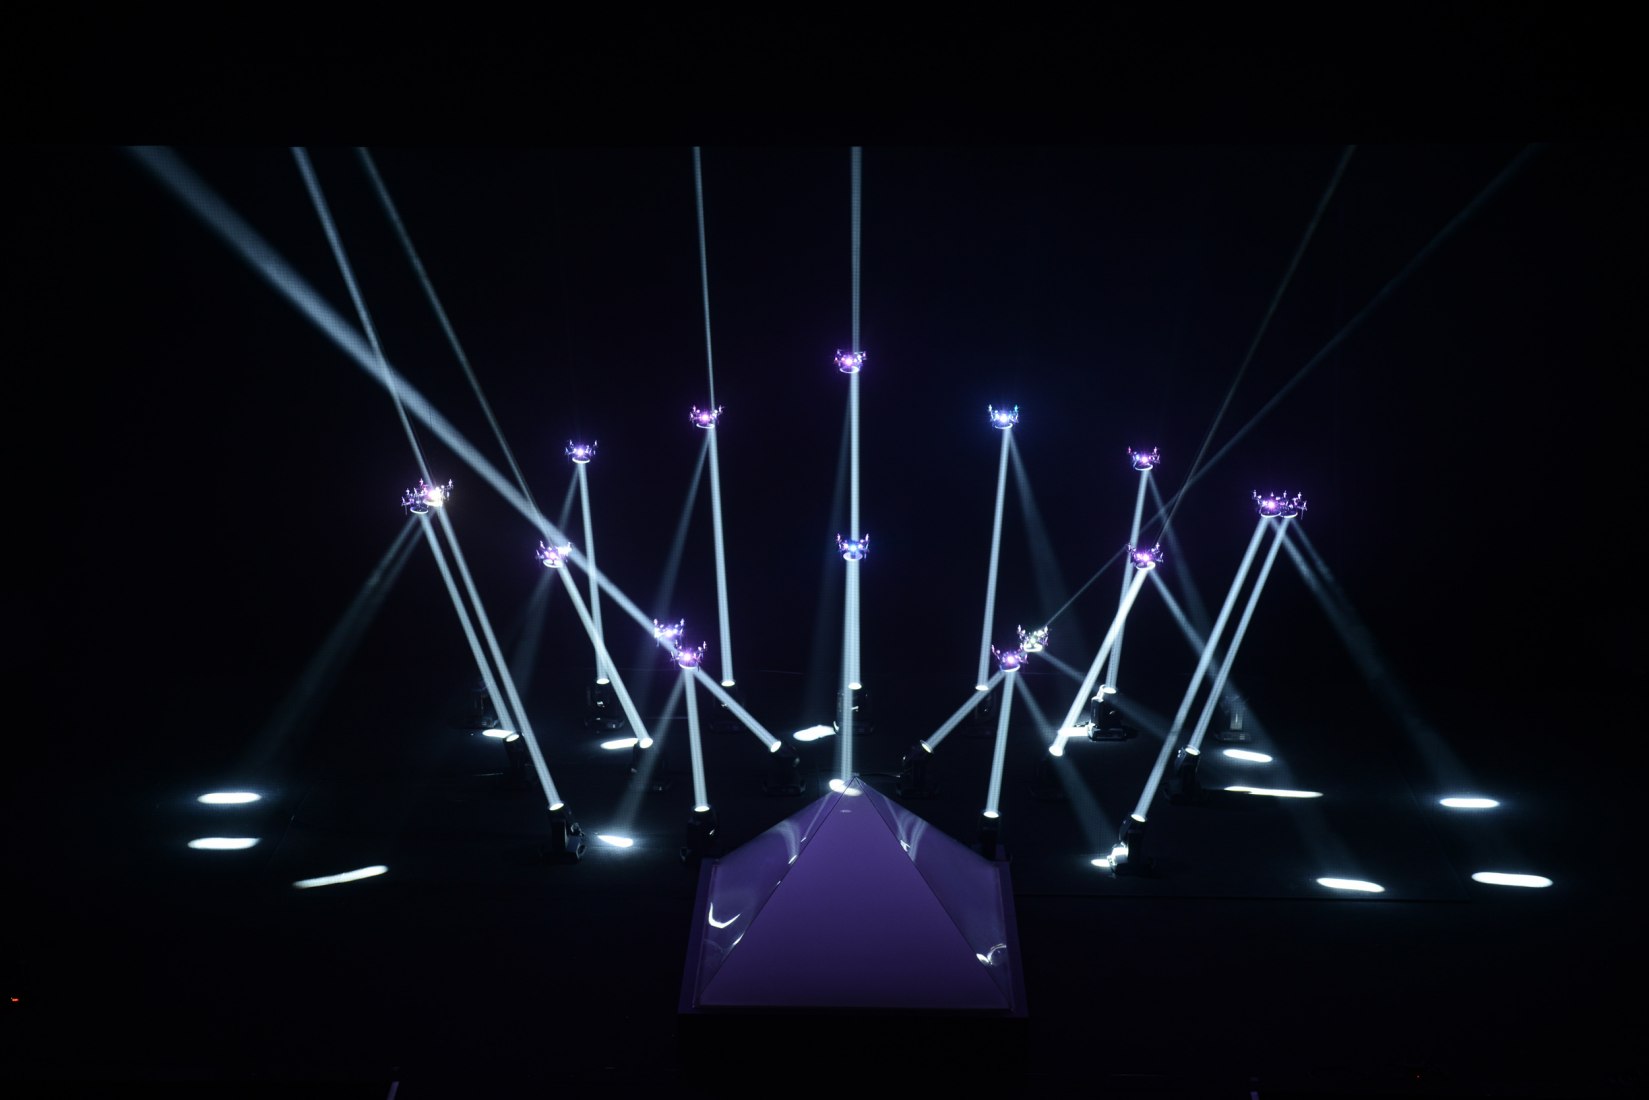 Meet your creator-Quadrotor show by Saatchi & Saatchi creatives and Marshmallow Laser Feast